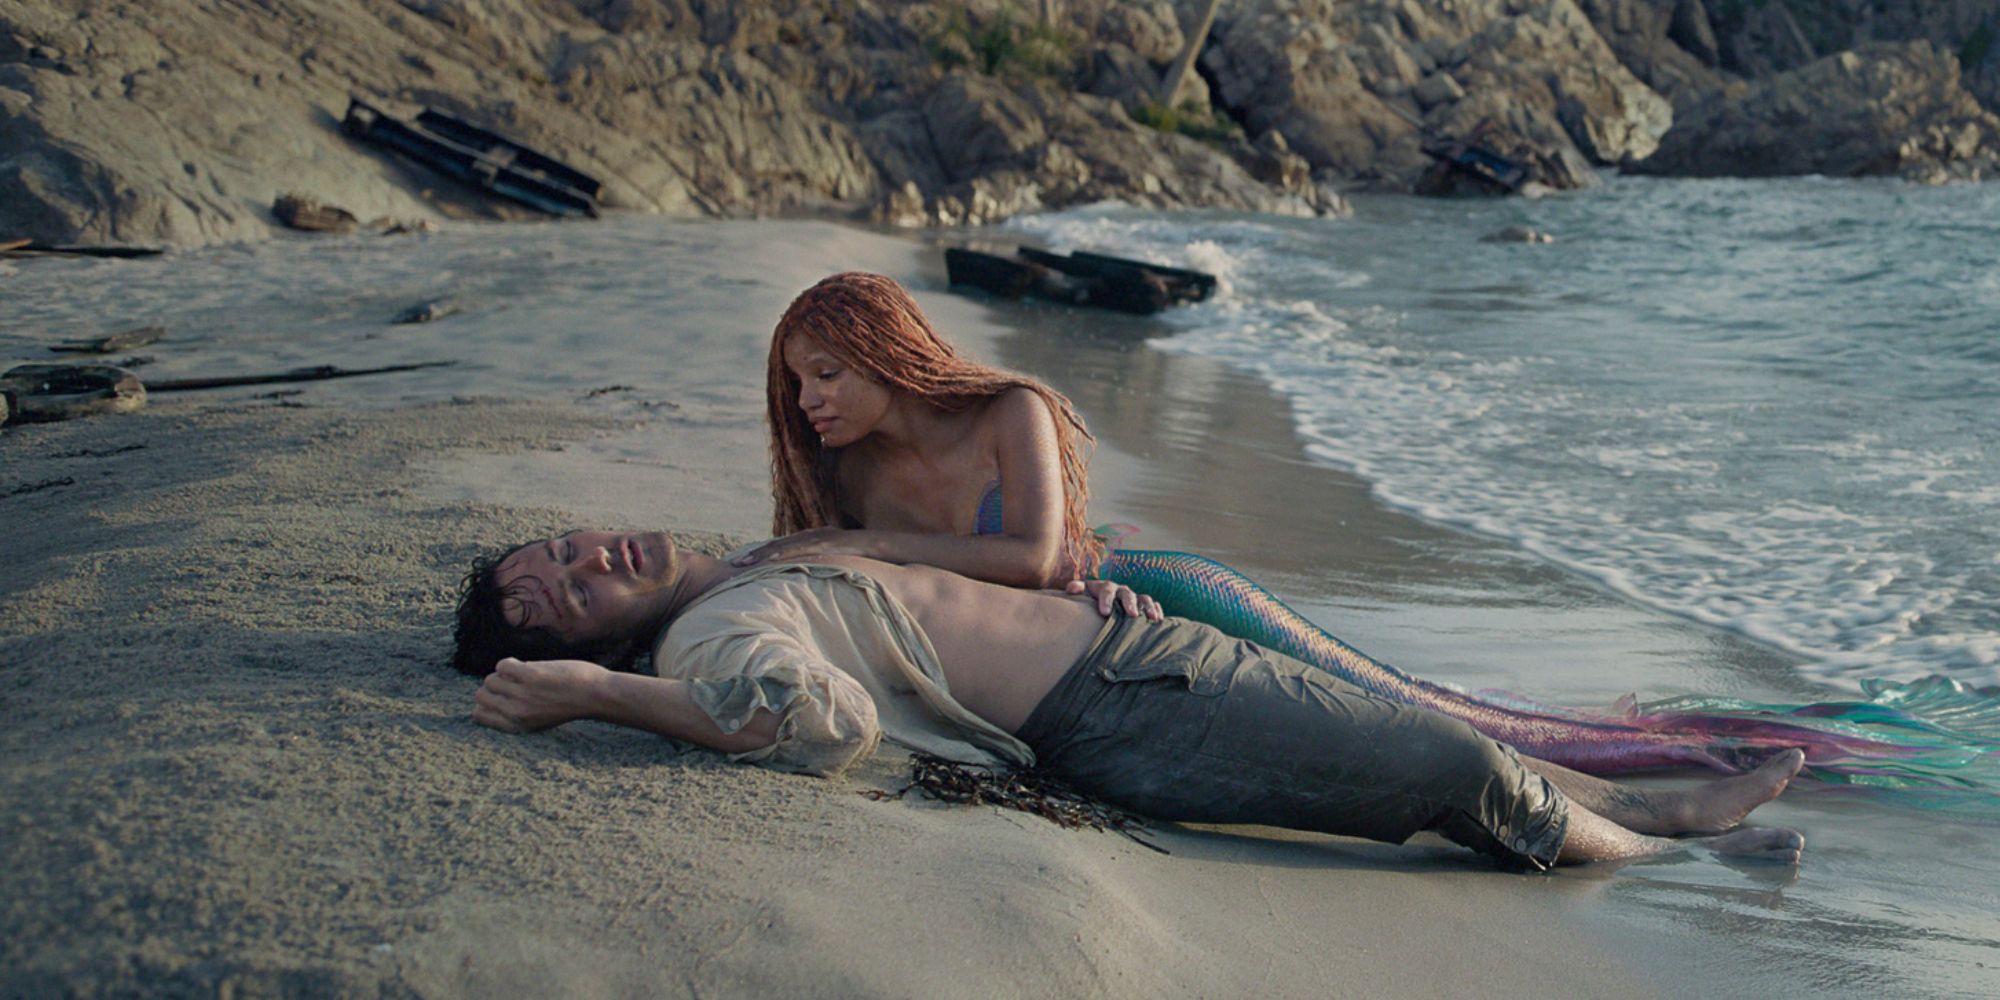 The Little Mermaid Ariel and Prince Eric washed up on the beach